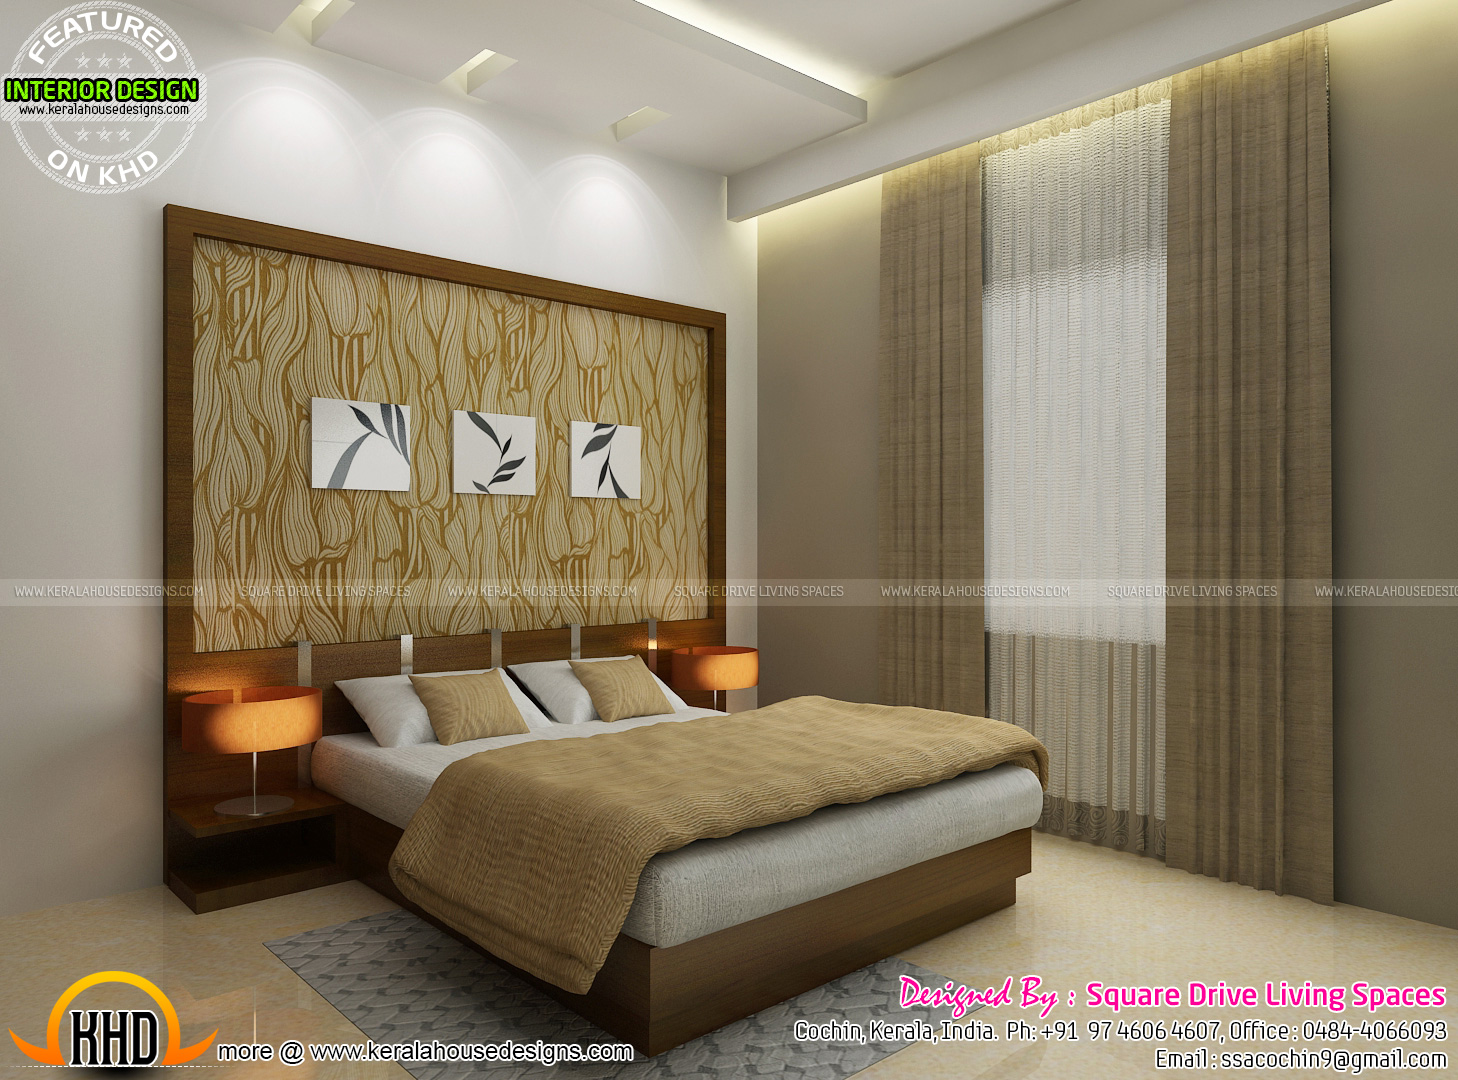 Interior designs of master bedroom, living, kitchen and 